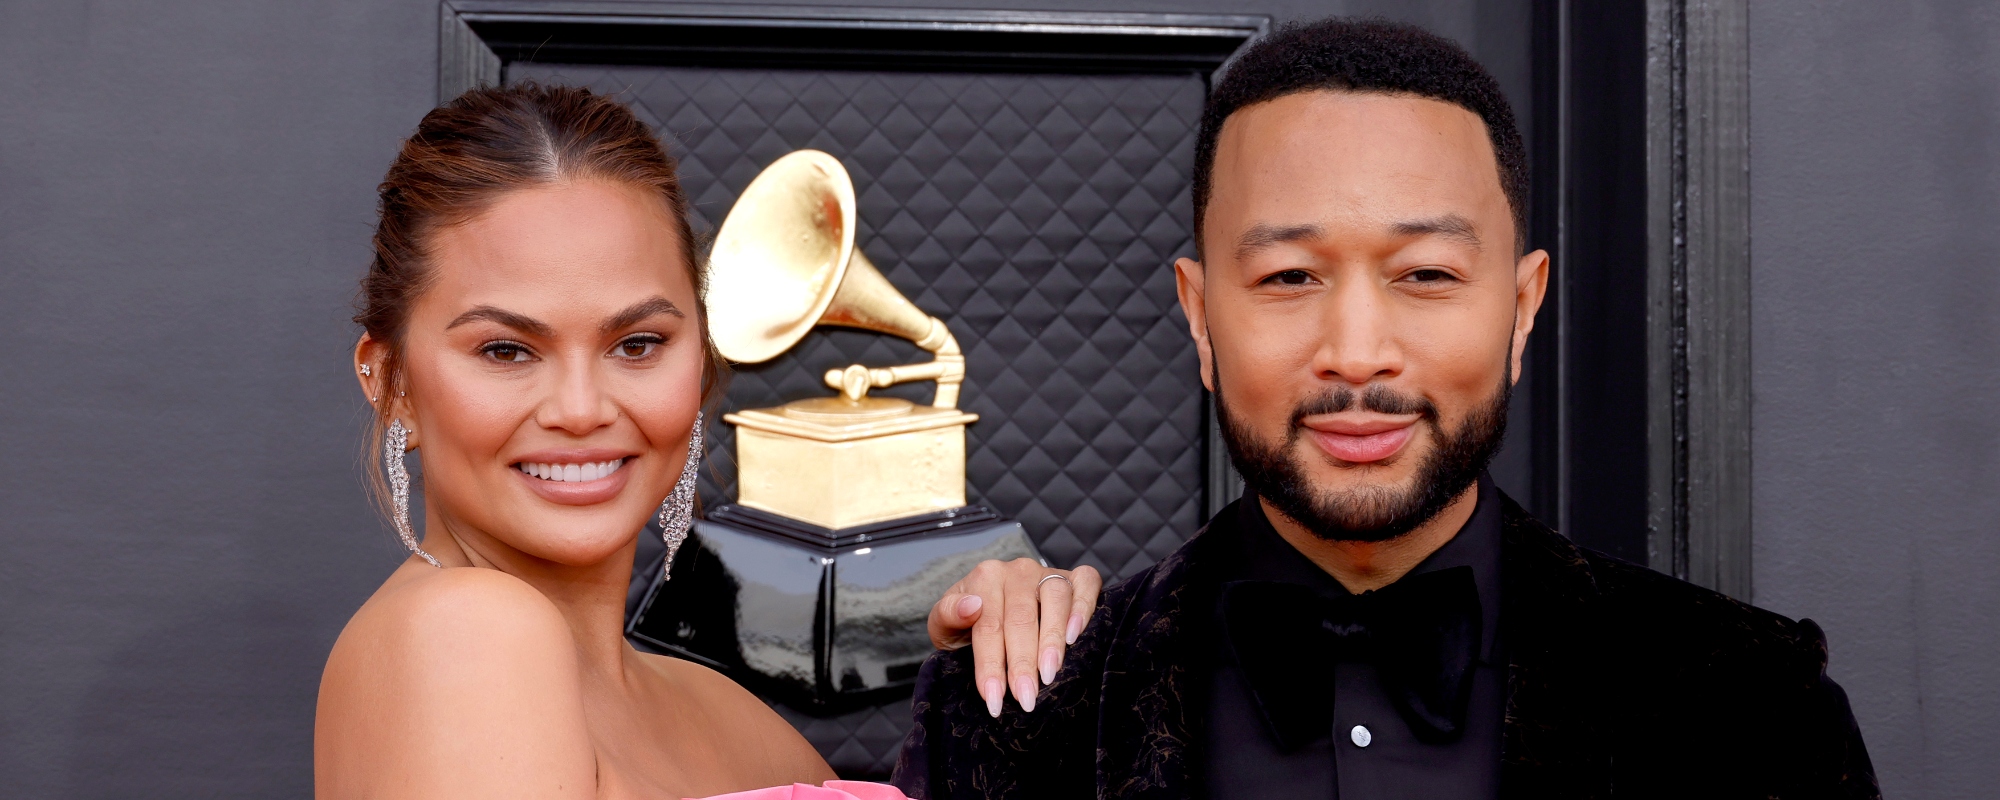 The Voice’s John Legend Shares Beautiful Family Photo with Chrissy Teigen: “So Grateful”